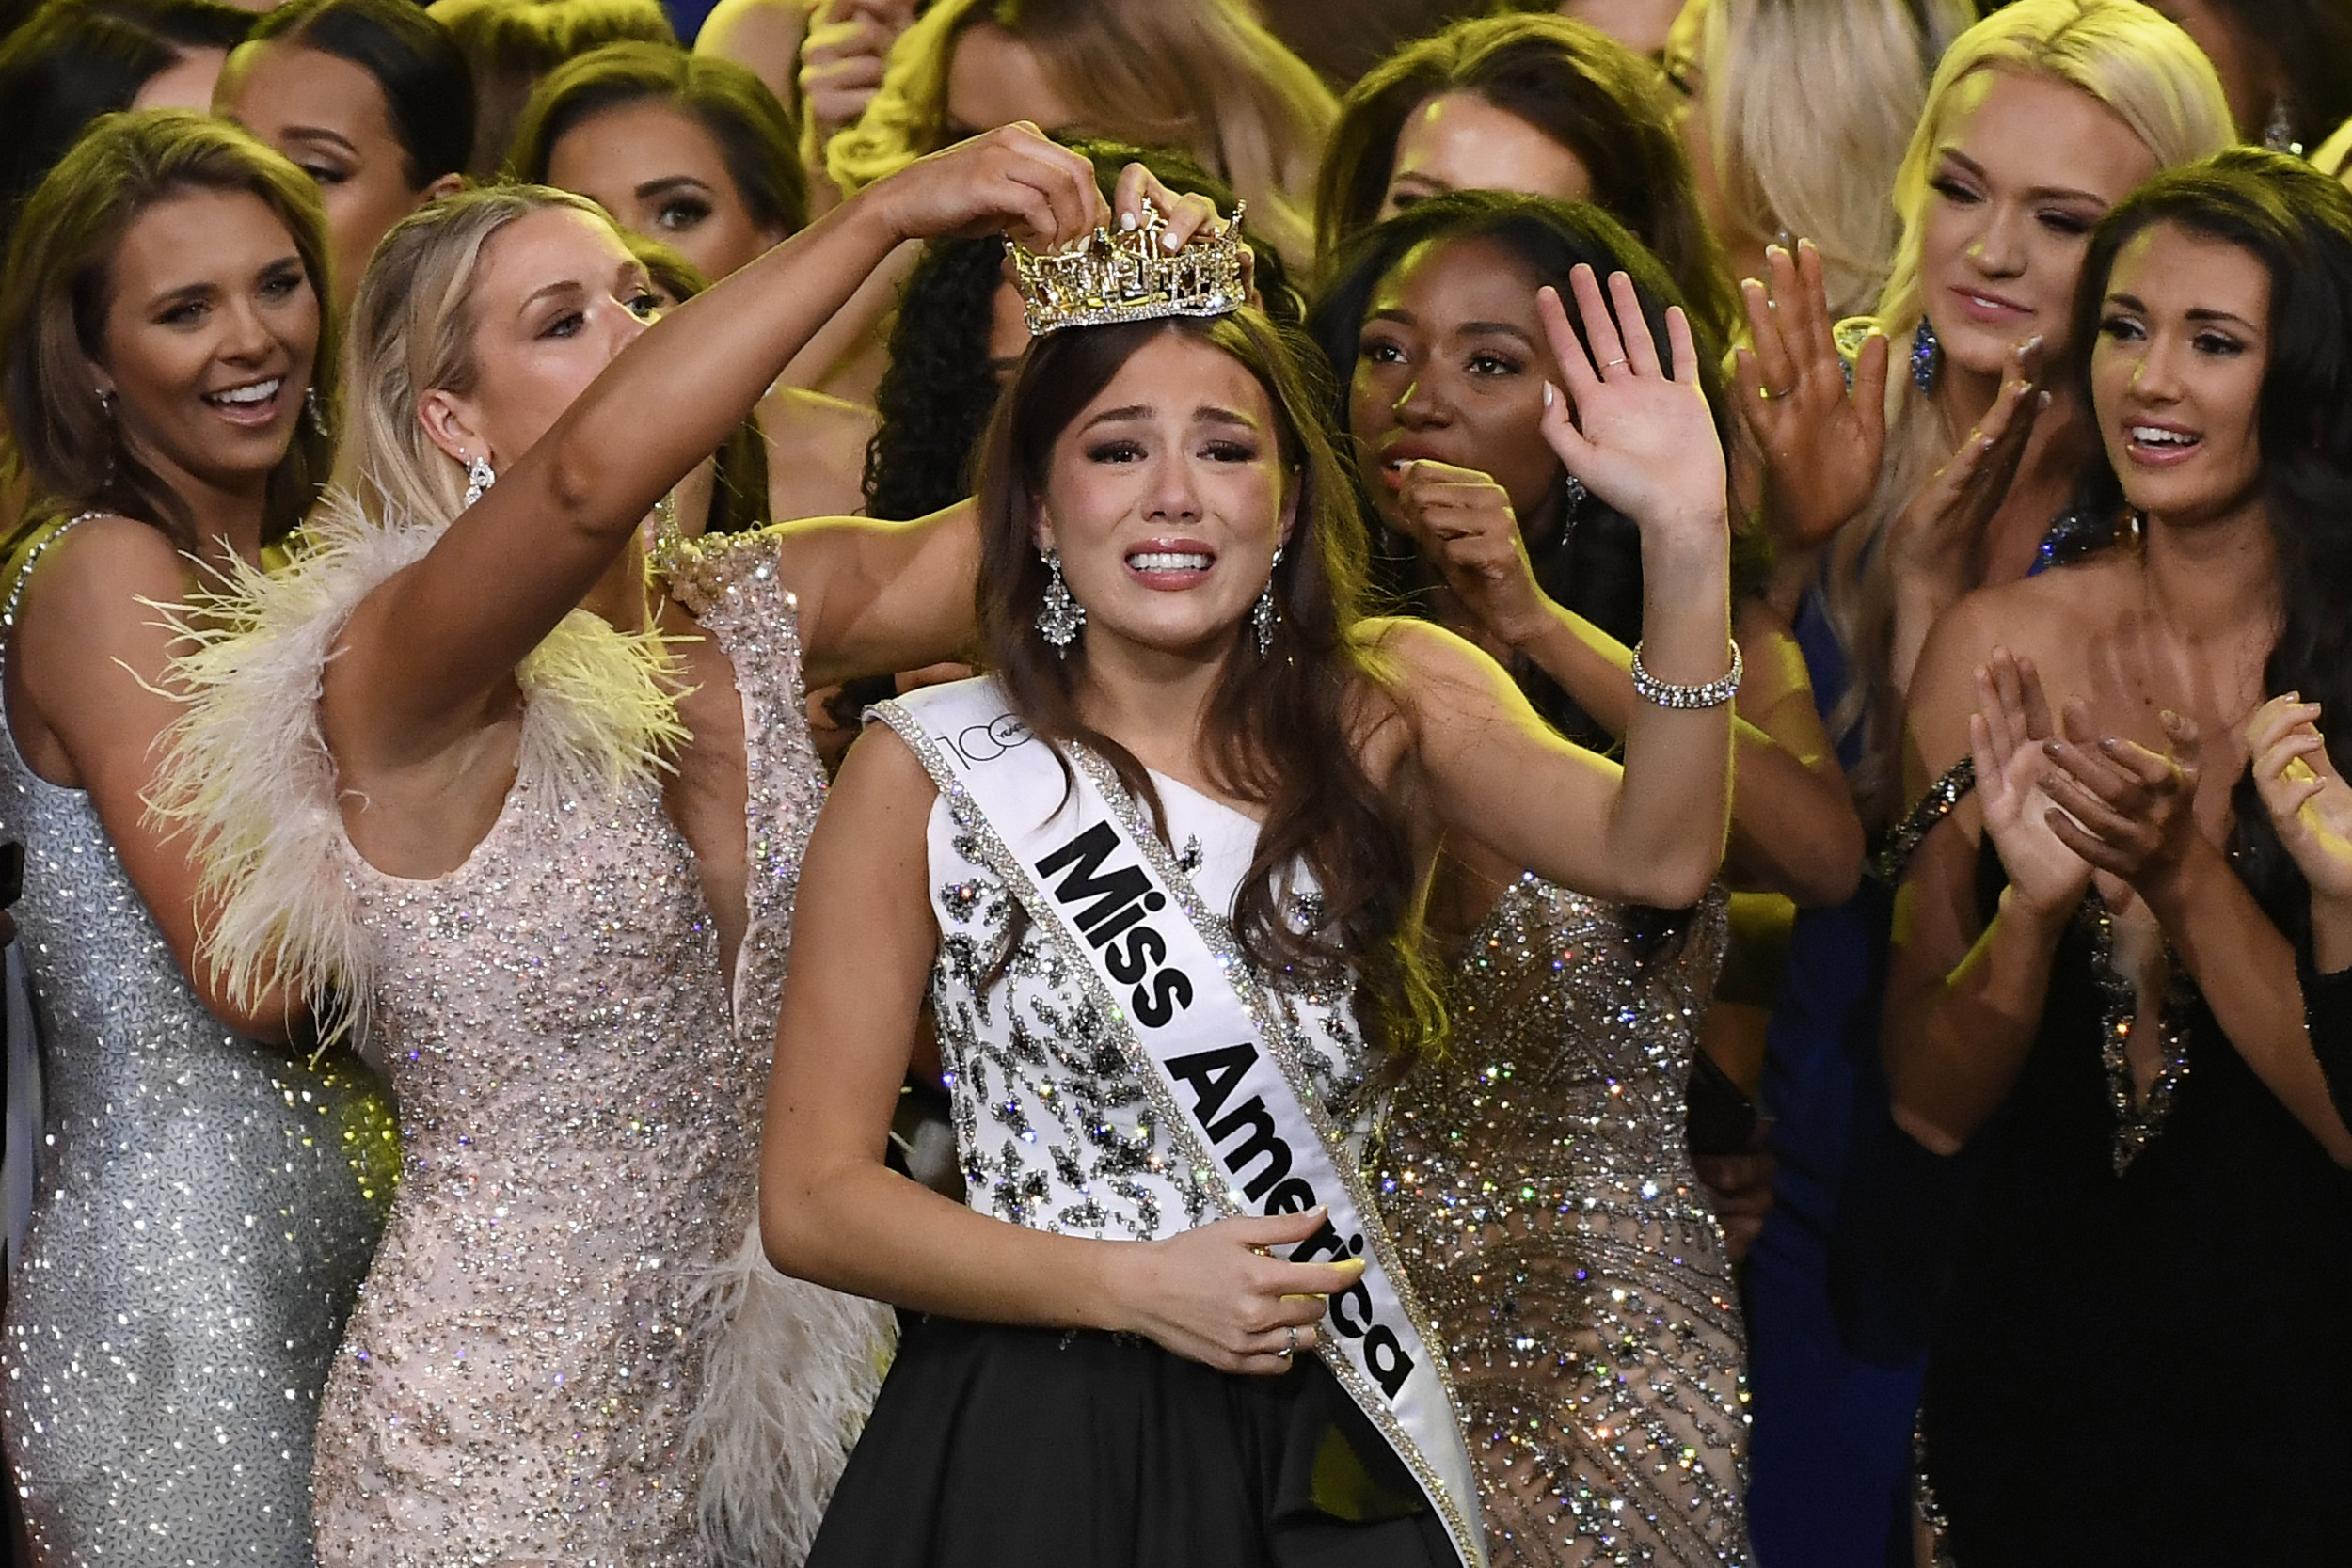 who-is-miss-america-2022-and-what-prize-did-she-win